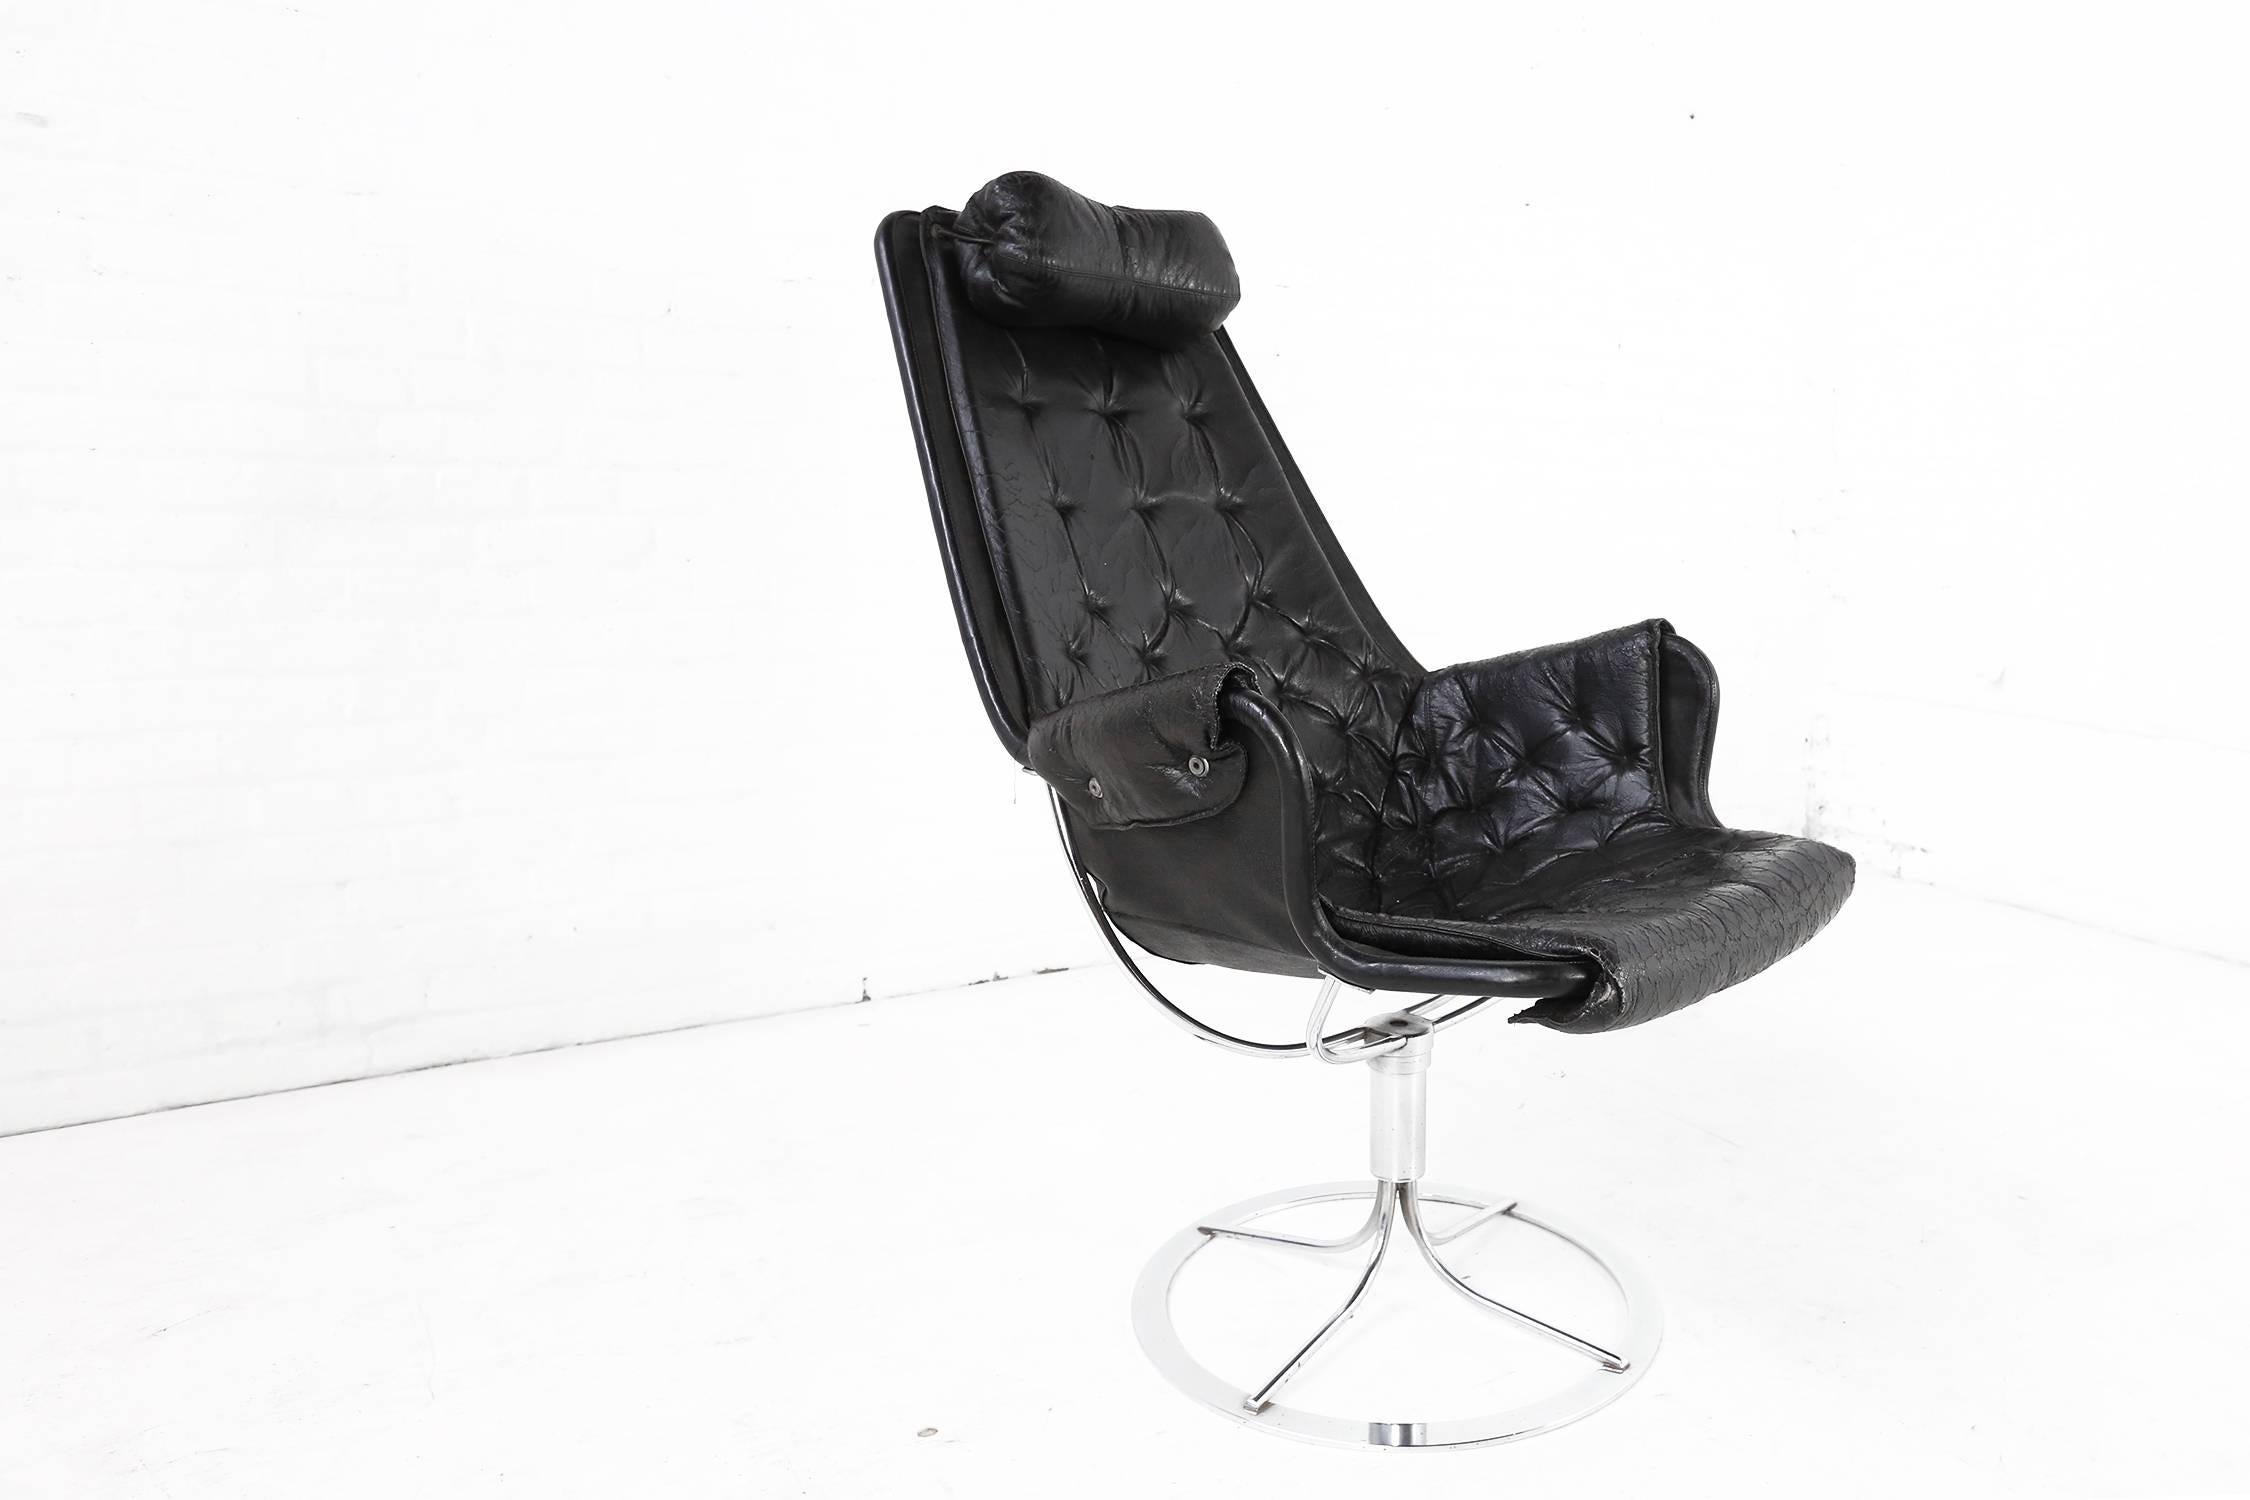 Leather Bruno Mathsson Jetson Swivel Armchair for DUX, Sweden, 1970s For Sale